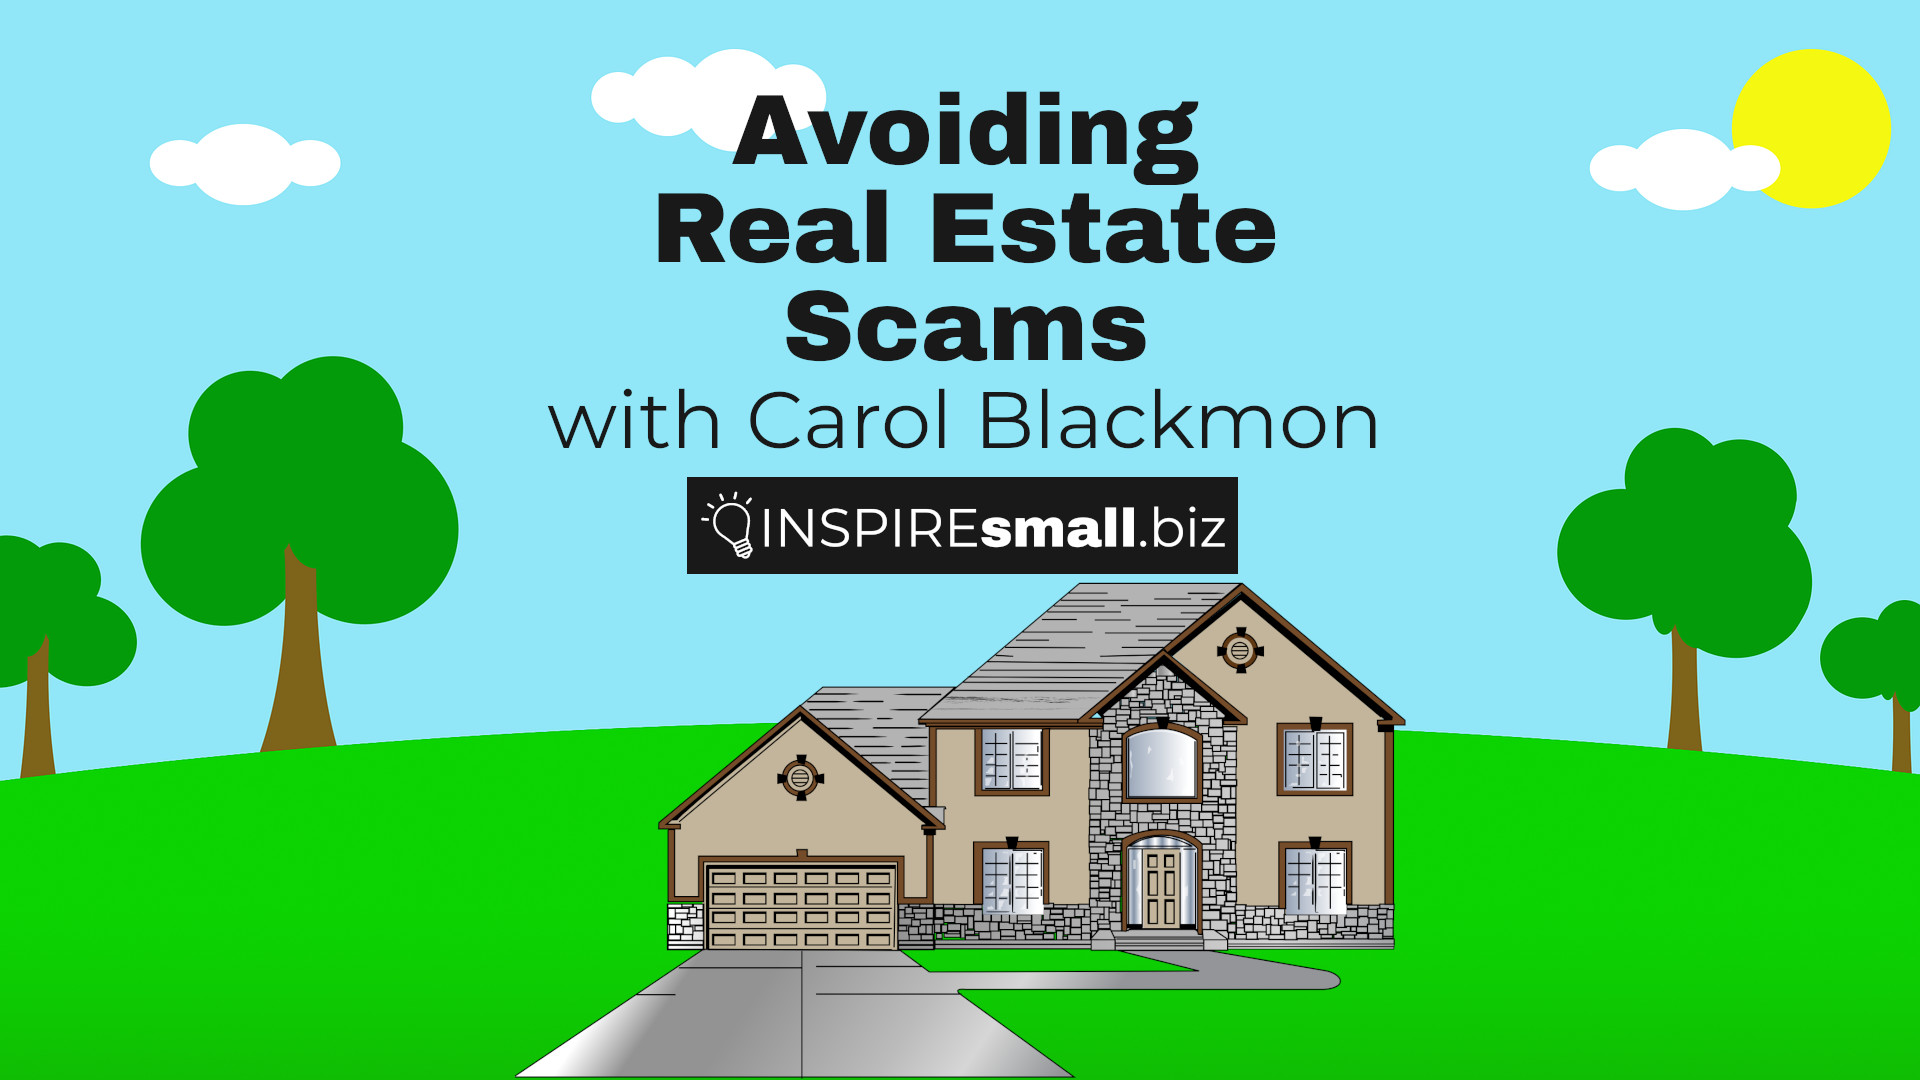 Avoiding Real Estate Scams with Carol Blackmon, hosted by INSPIREsmall.biz. The background image is a two story house on a green field, with a bright blue sky, and 4 trees on the horizon.